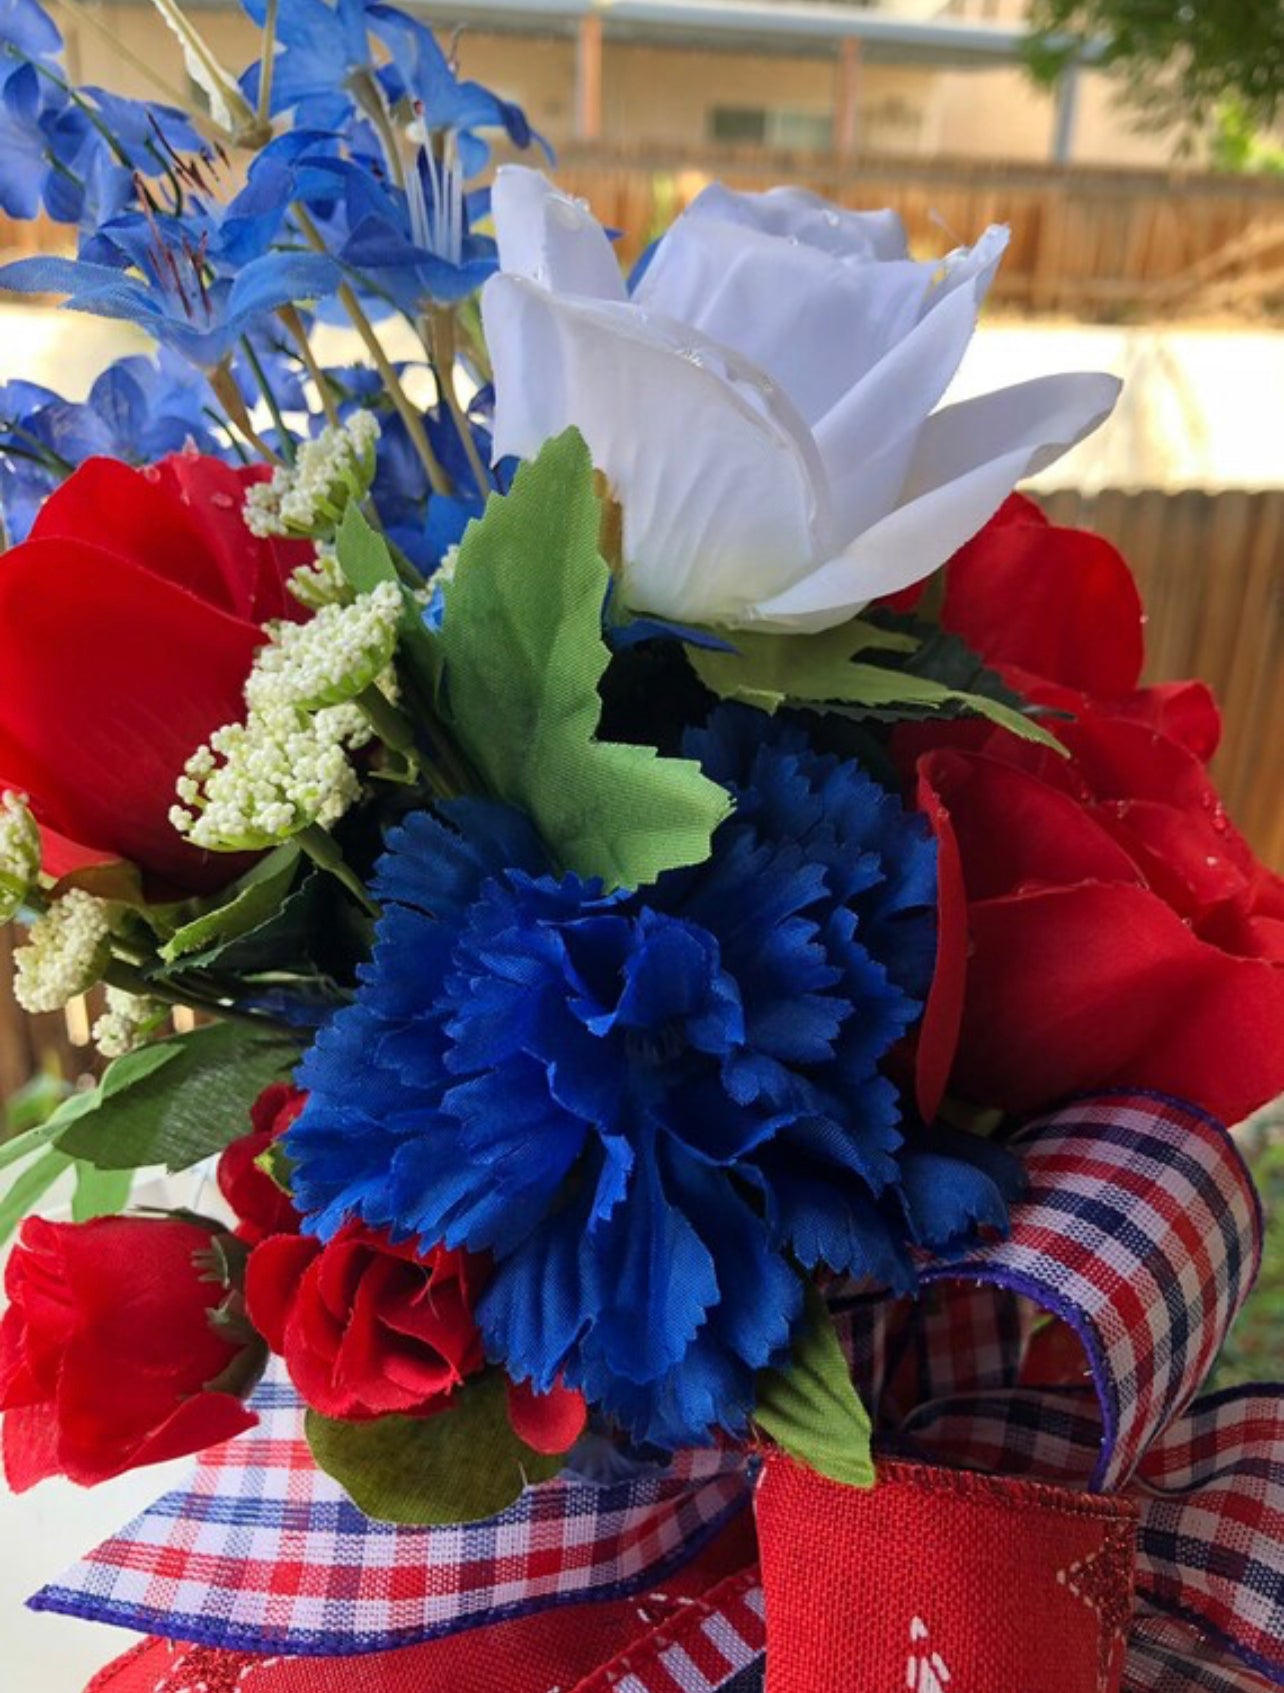 Close Up Detail of Red and White Roses with Blue Cornflowers